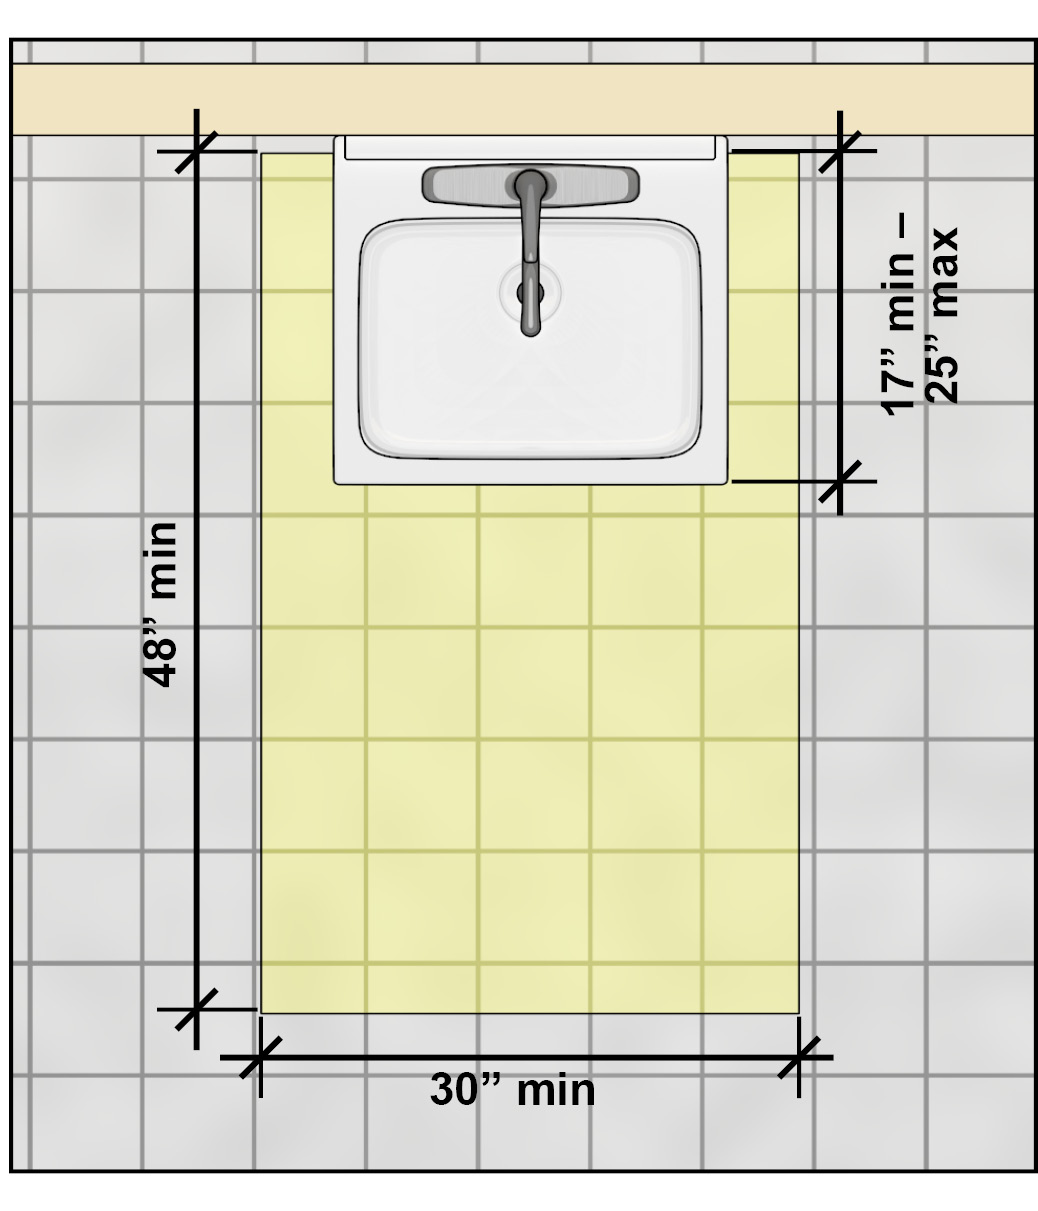 Plan view of clear floor space underlying lavatory.  Highlighted clear floor space with dimensions of 30 inches wide minimum and 48 inches deep minimum.  The clear floor space underlies the lavatory 17 to 25 inches.